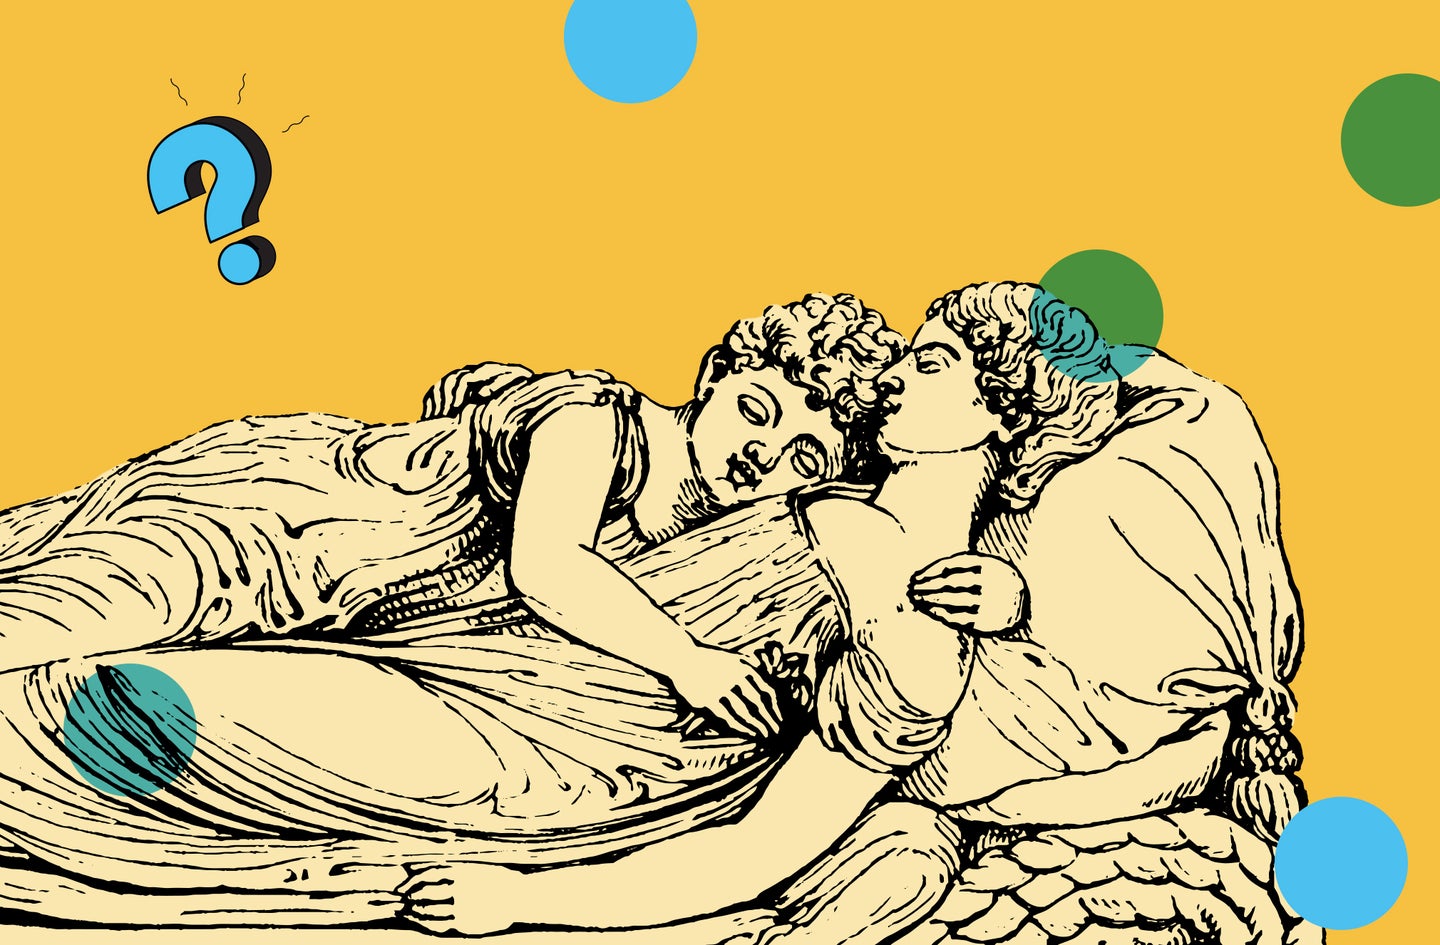 Two illustrated humans sleeping along with the Ask Us Anything logo